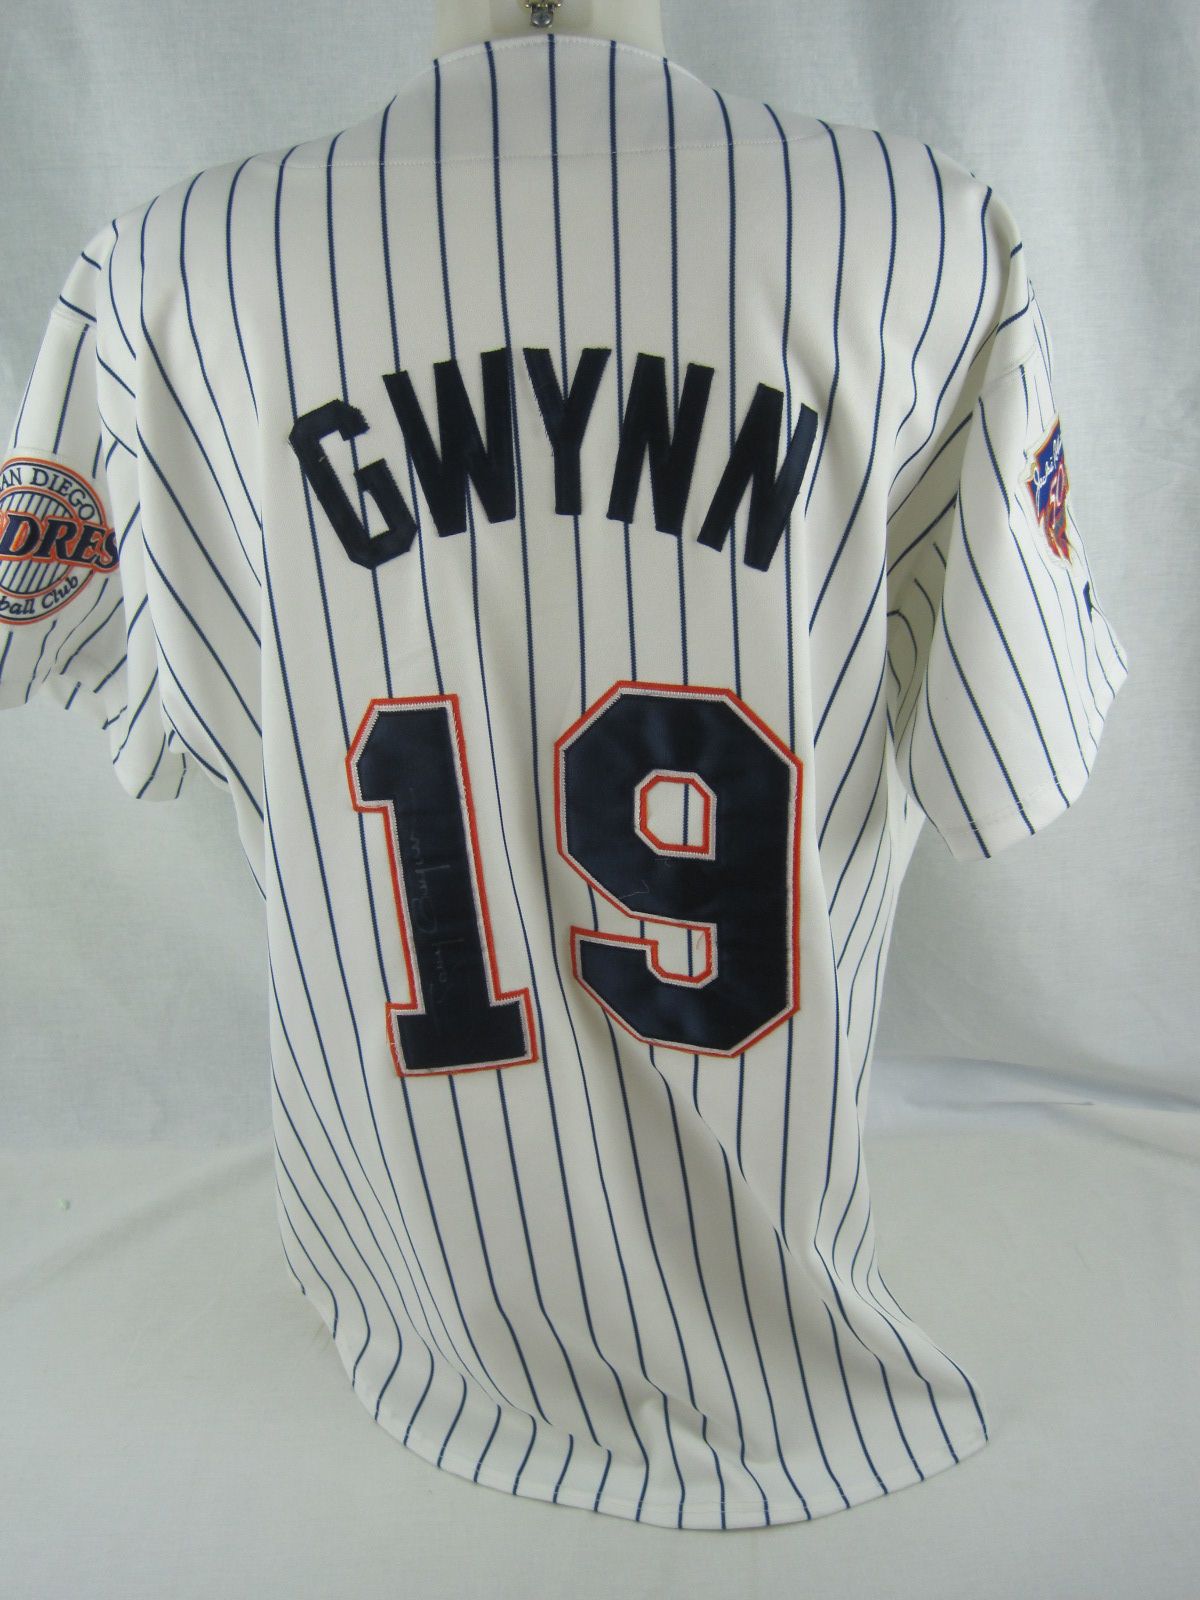 Tony Gwynn Signed San Diego Padres Jersey. Baseball Collectibles, Lot  #40147